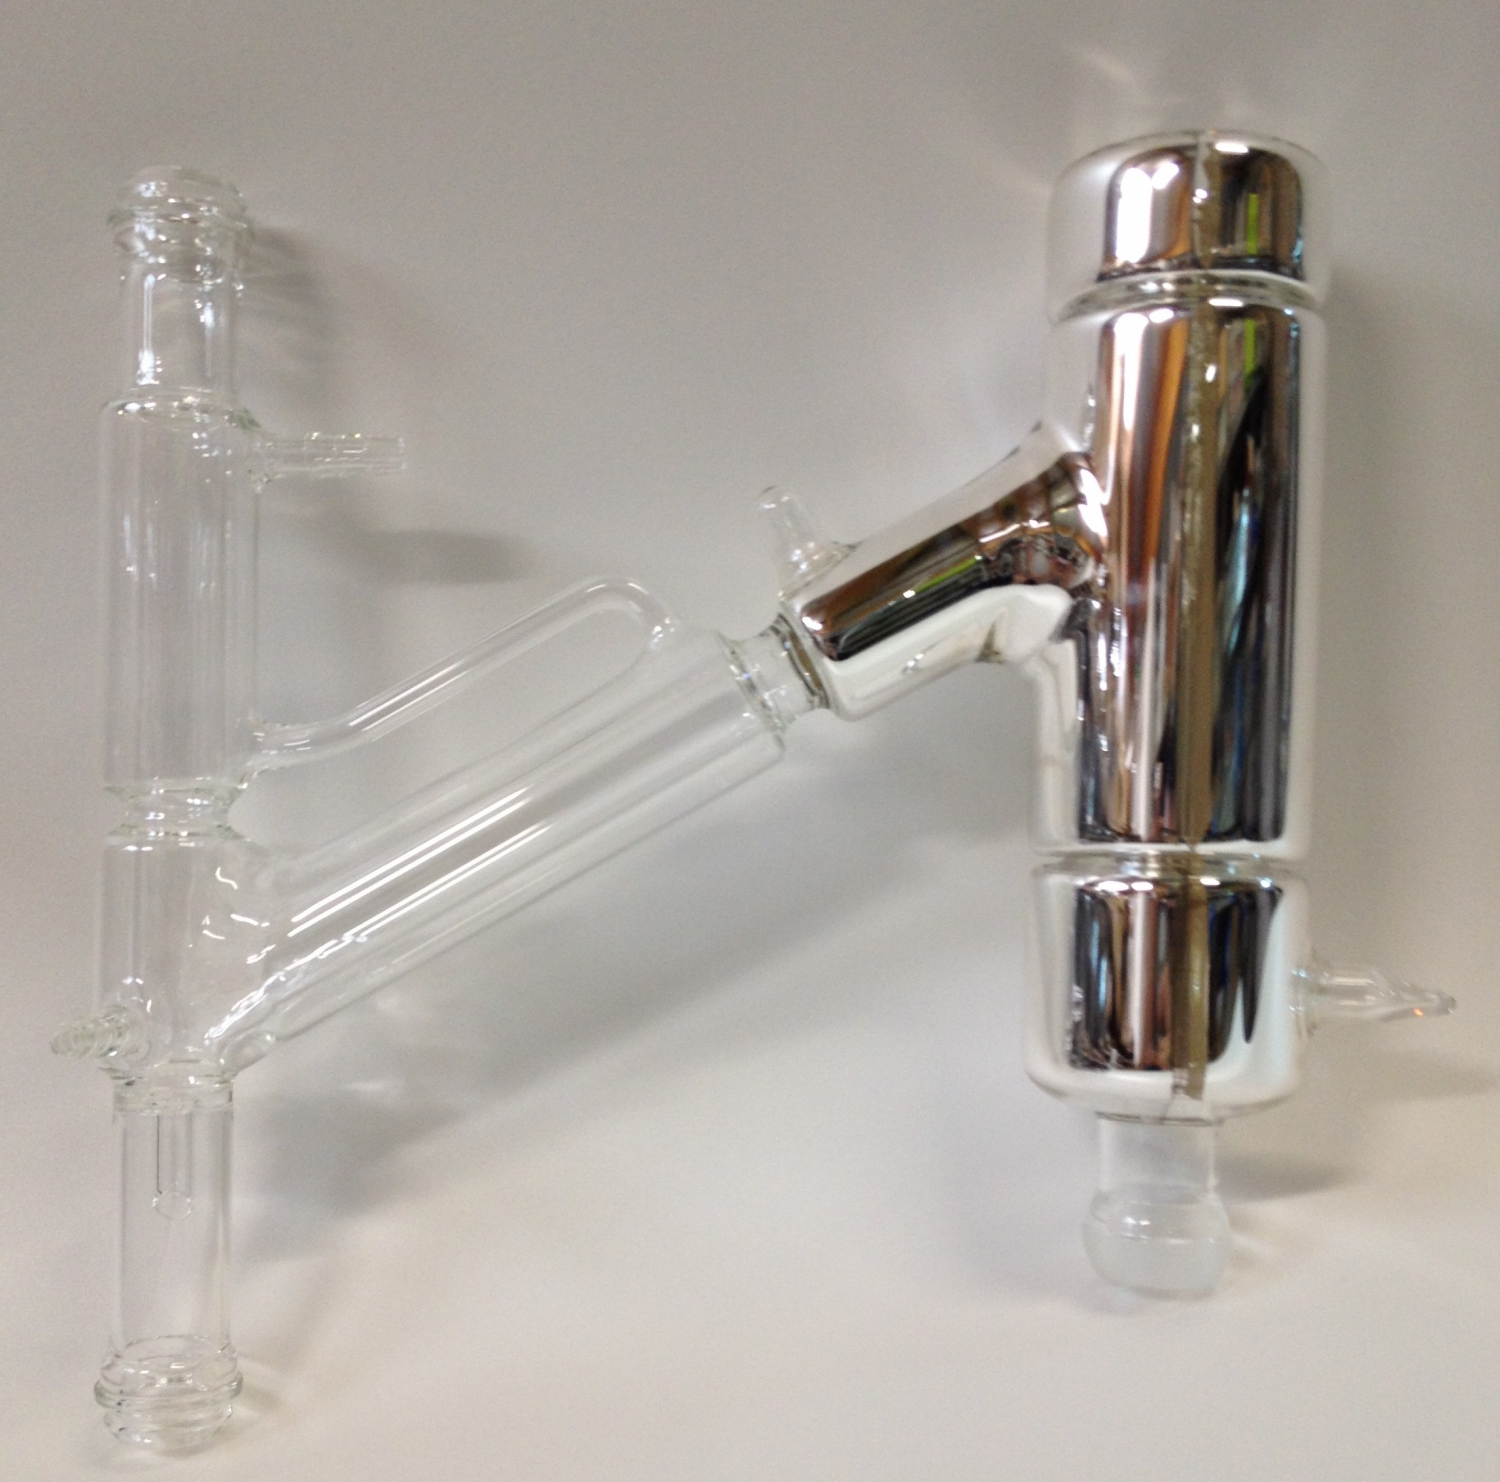 Silver coating for industrial and lab glassware